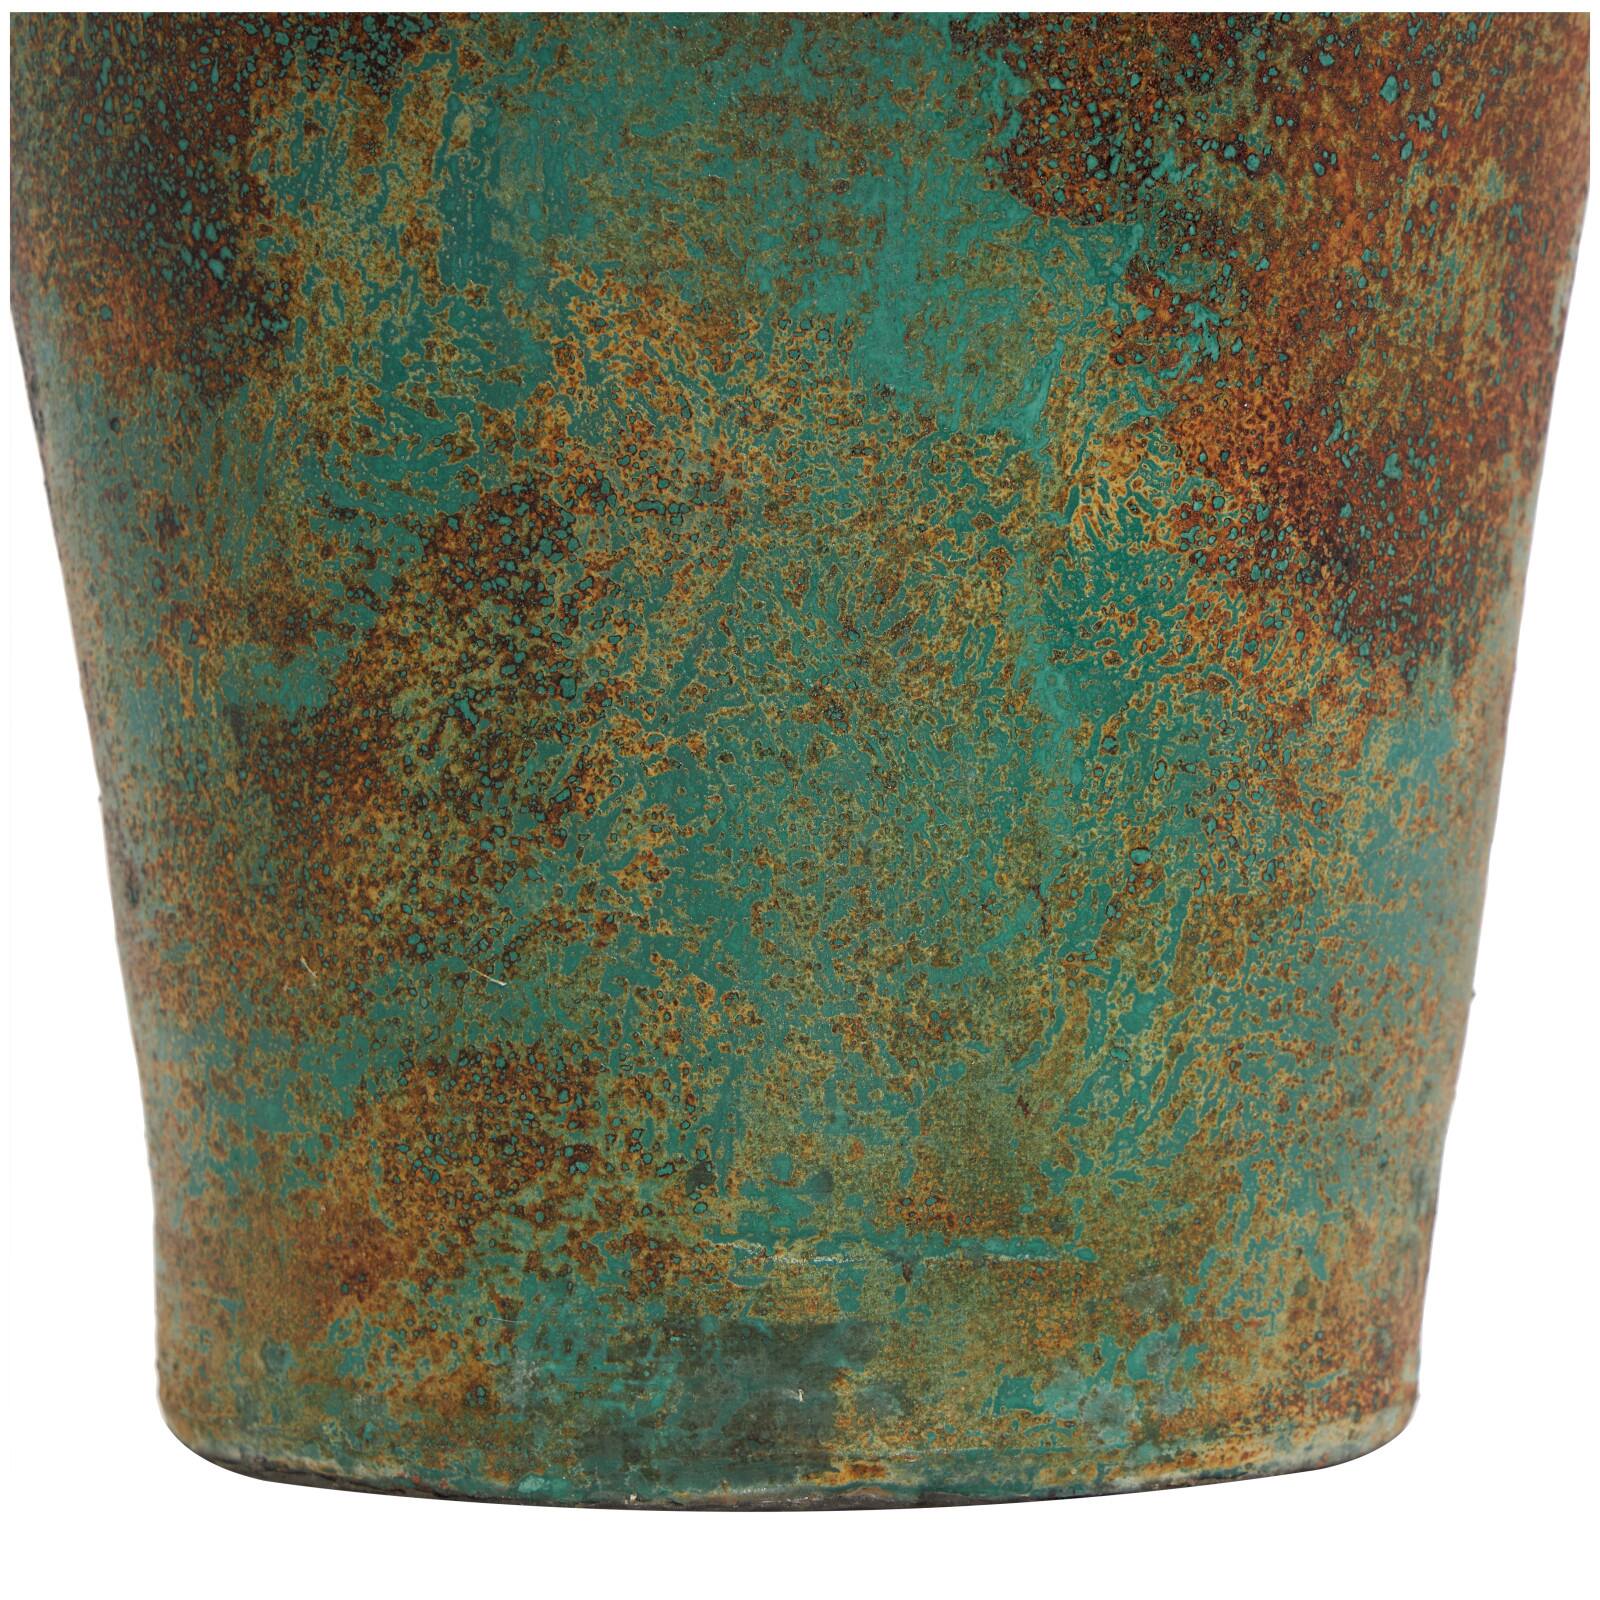 3ft. Green Ceramic Tall Distressed Antique Style Vase